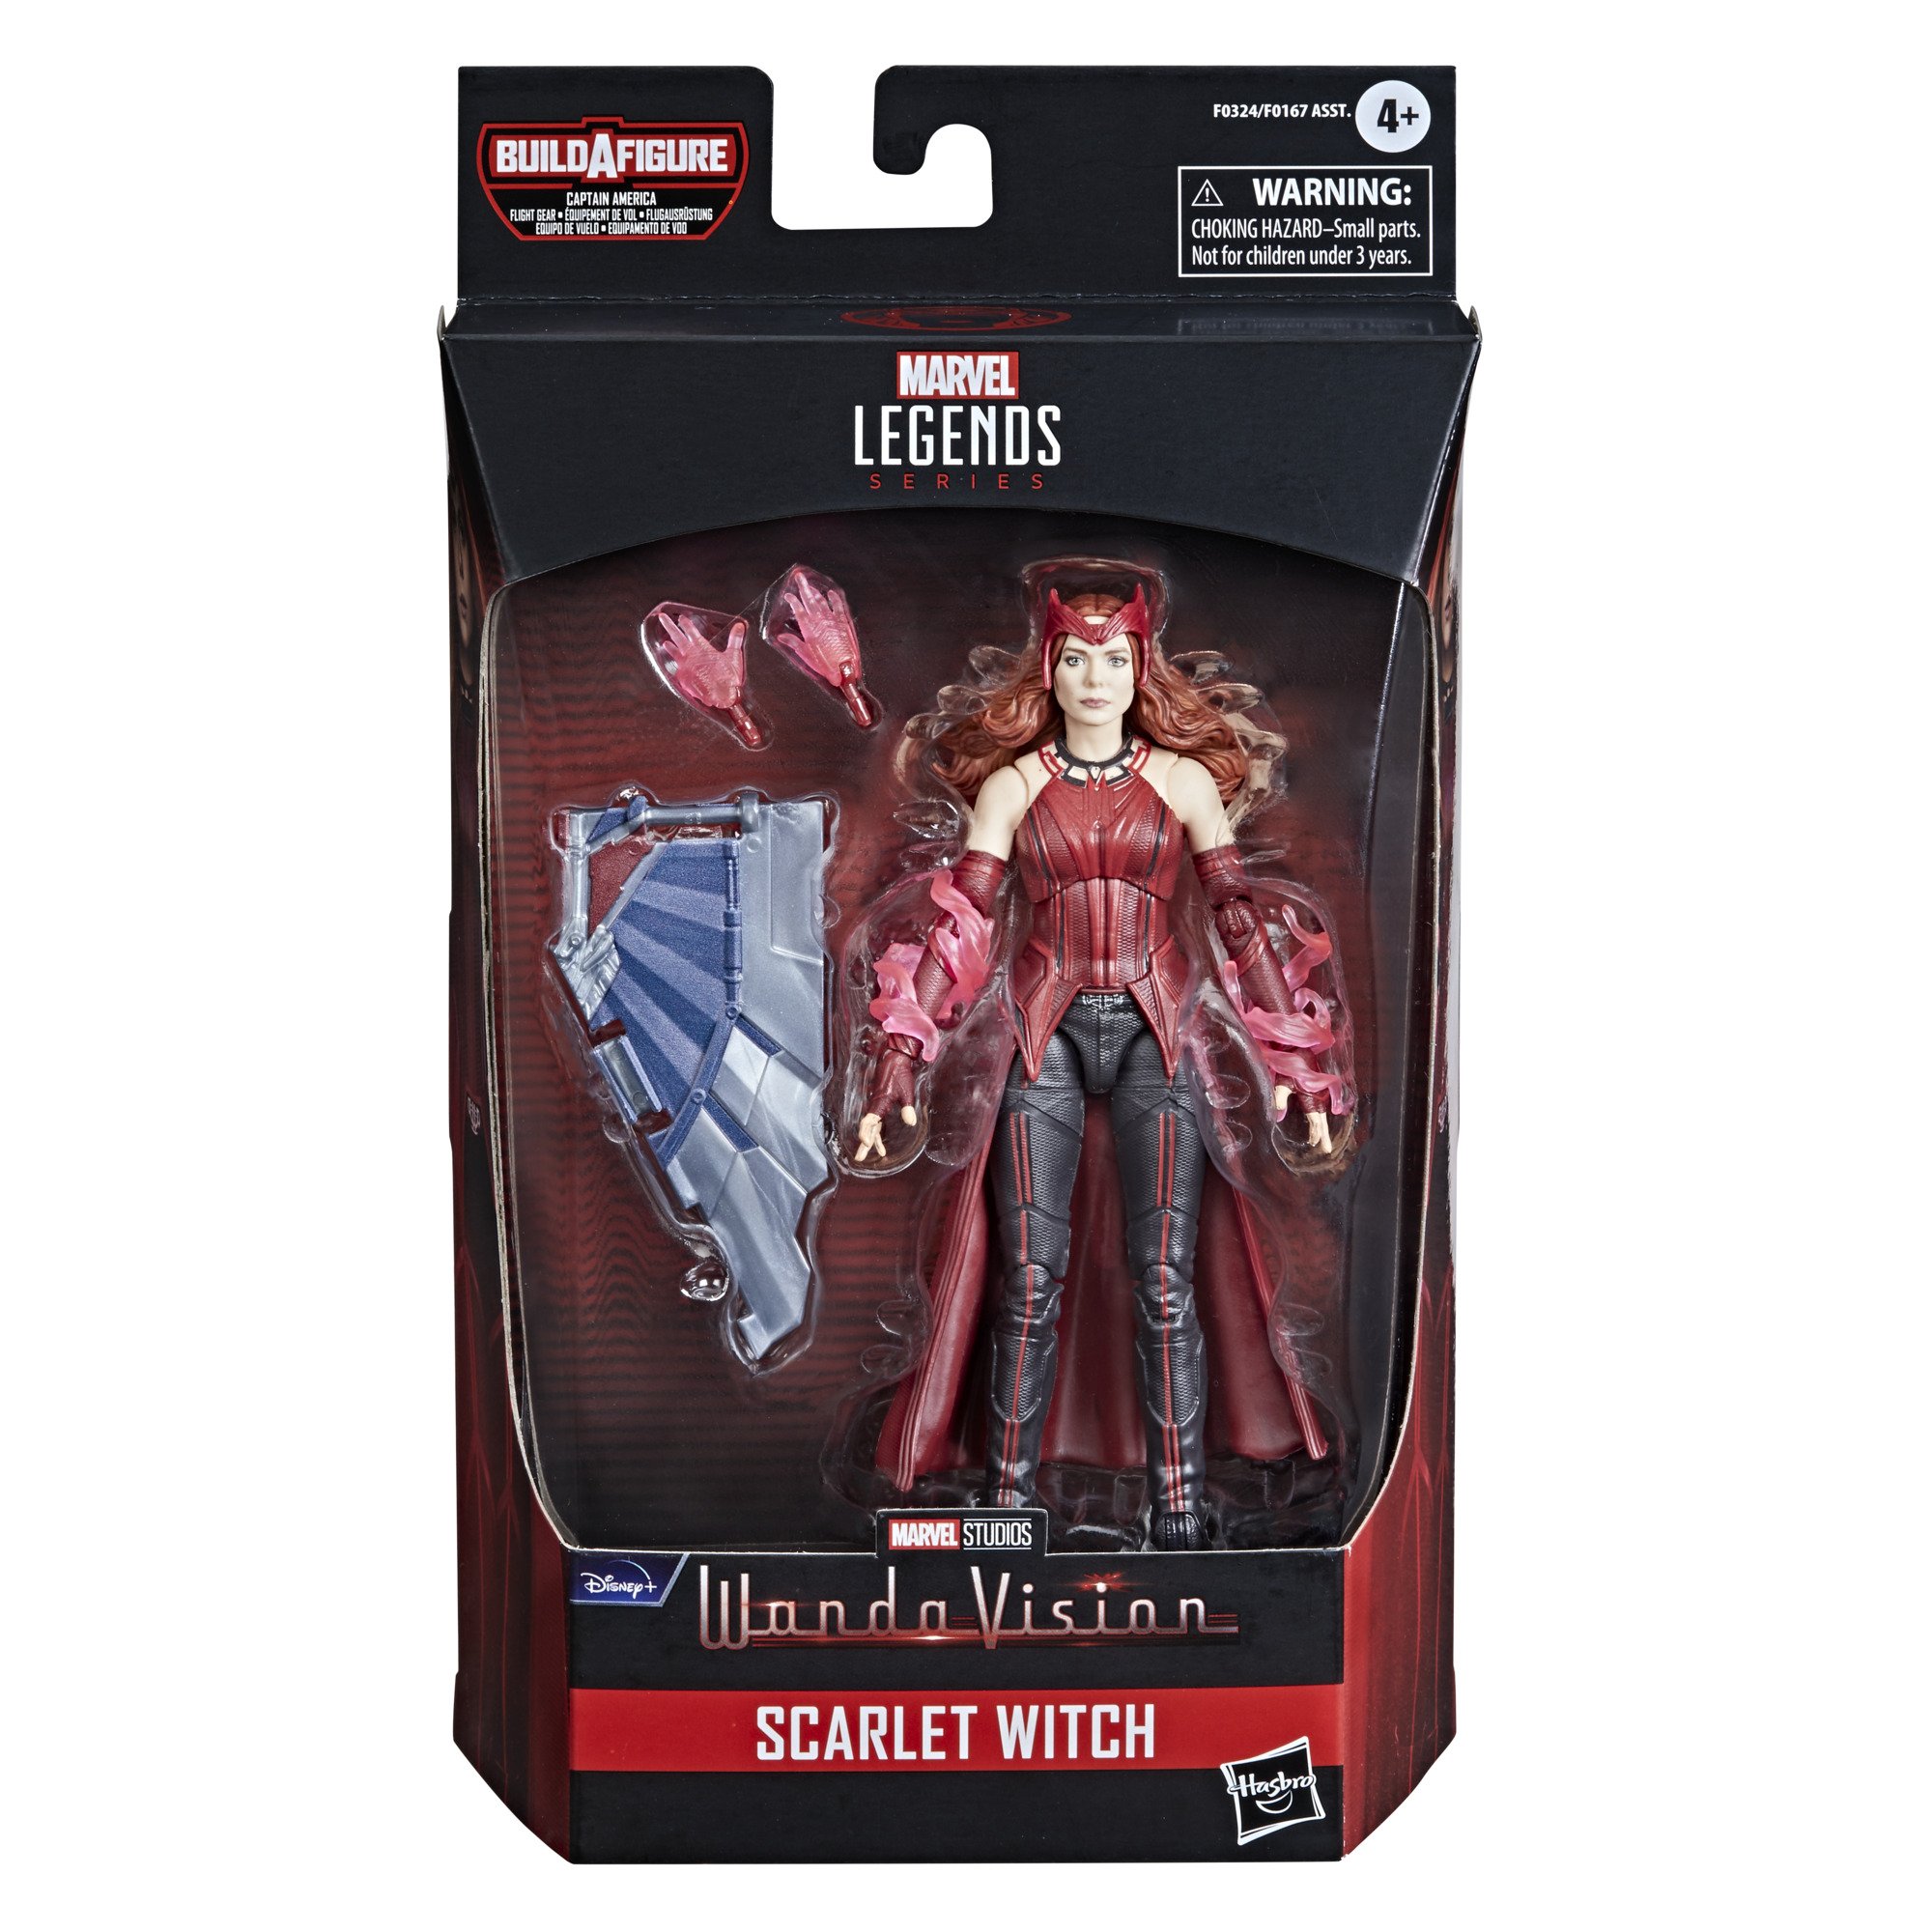 Scarlet Witch packaged